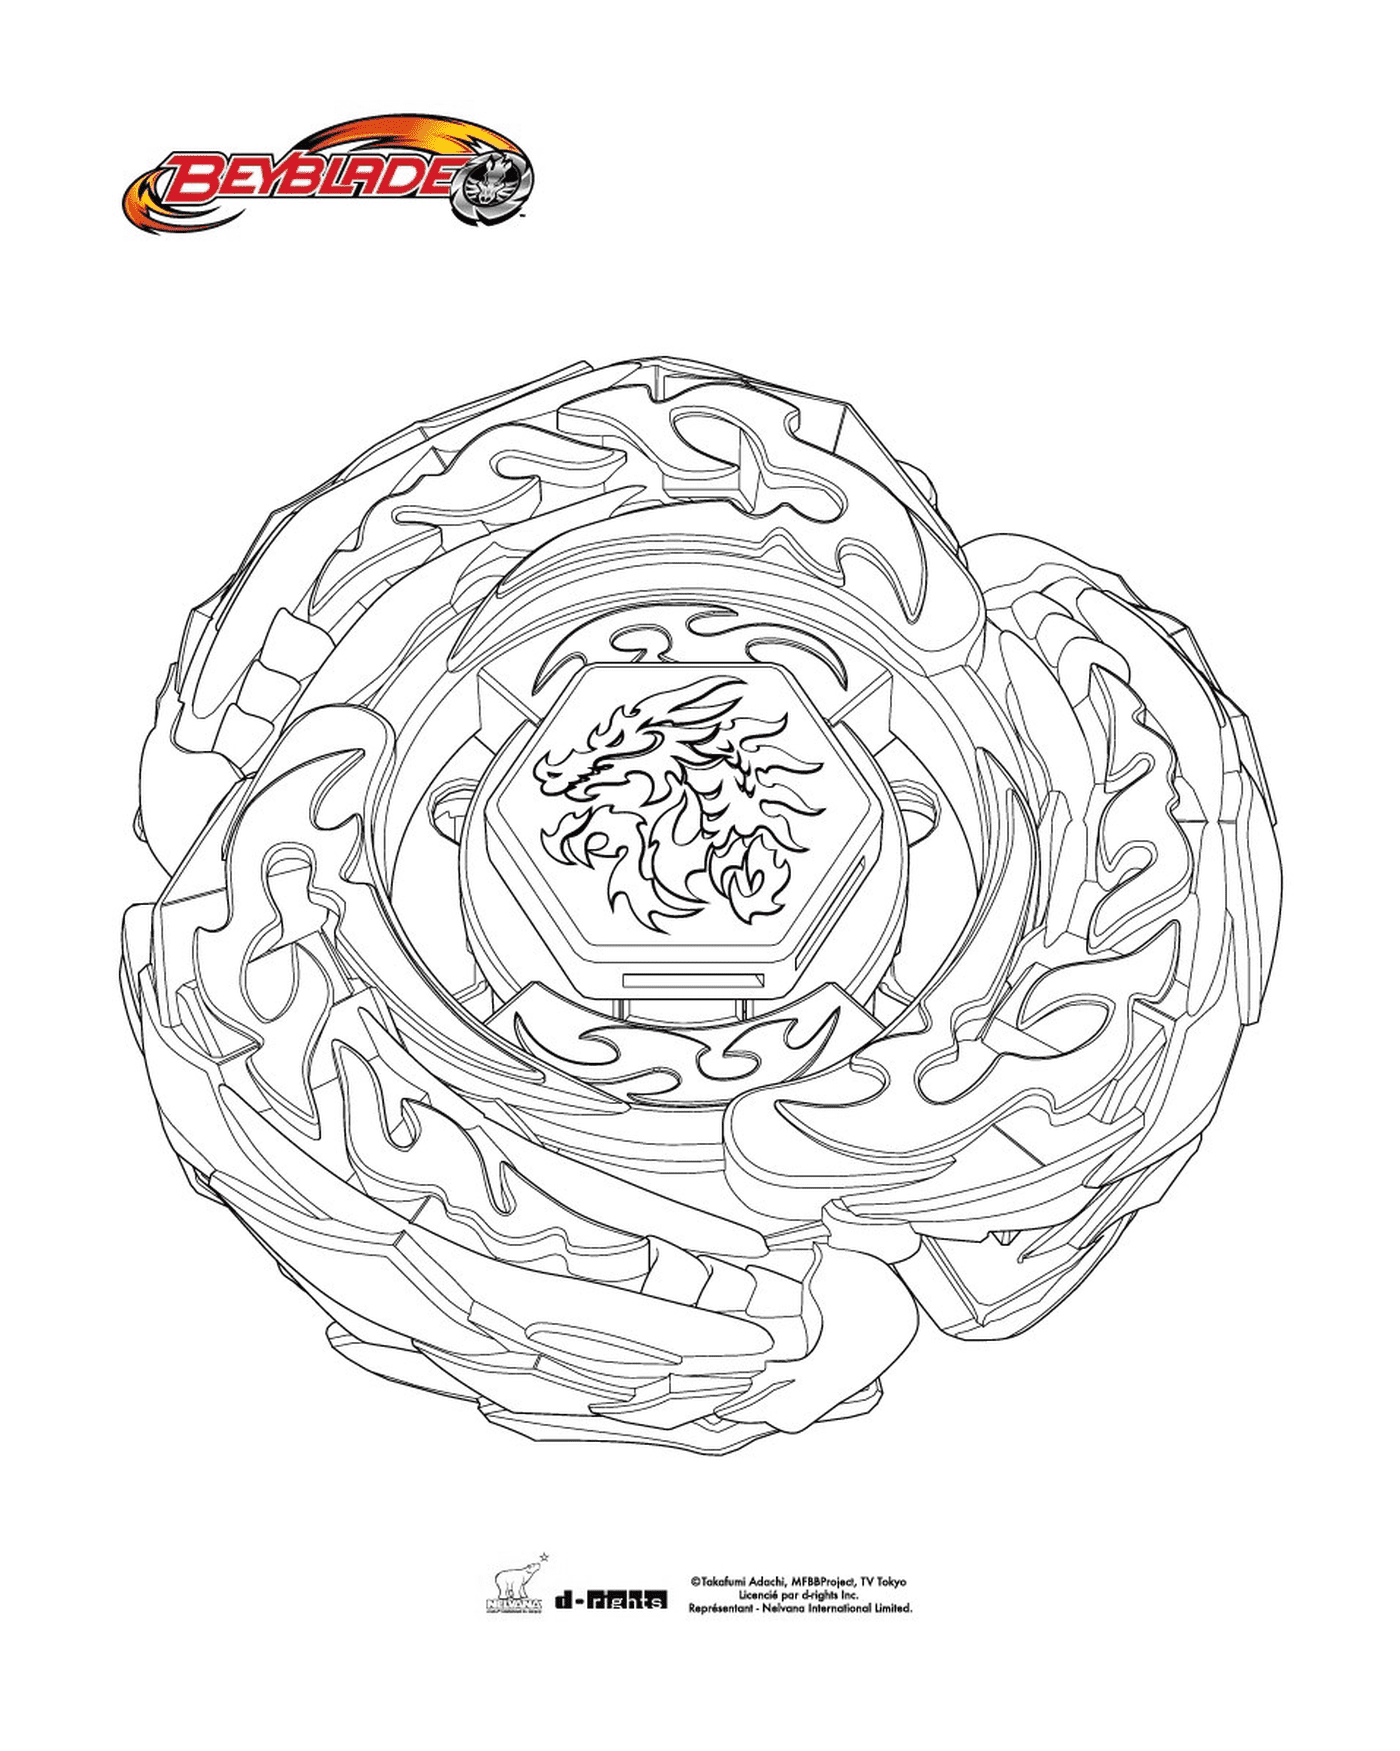  The image of a beyblade 